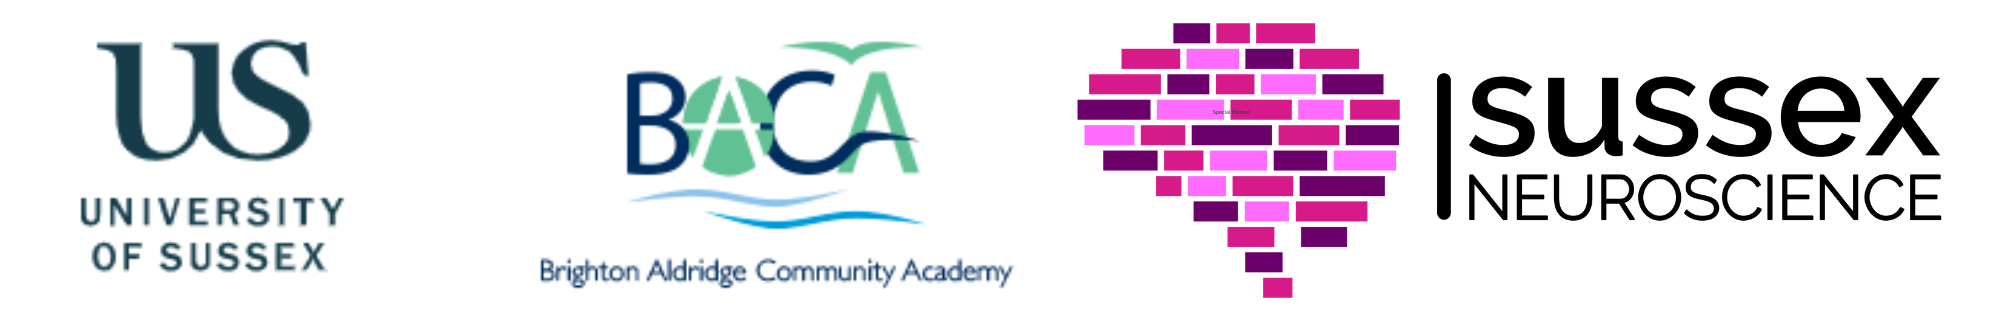 Logos for University of Sussex, Brighton and Aldridge Community Academy and Sussex Neuroscience